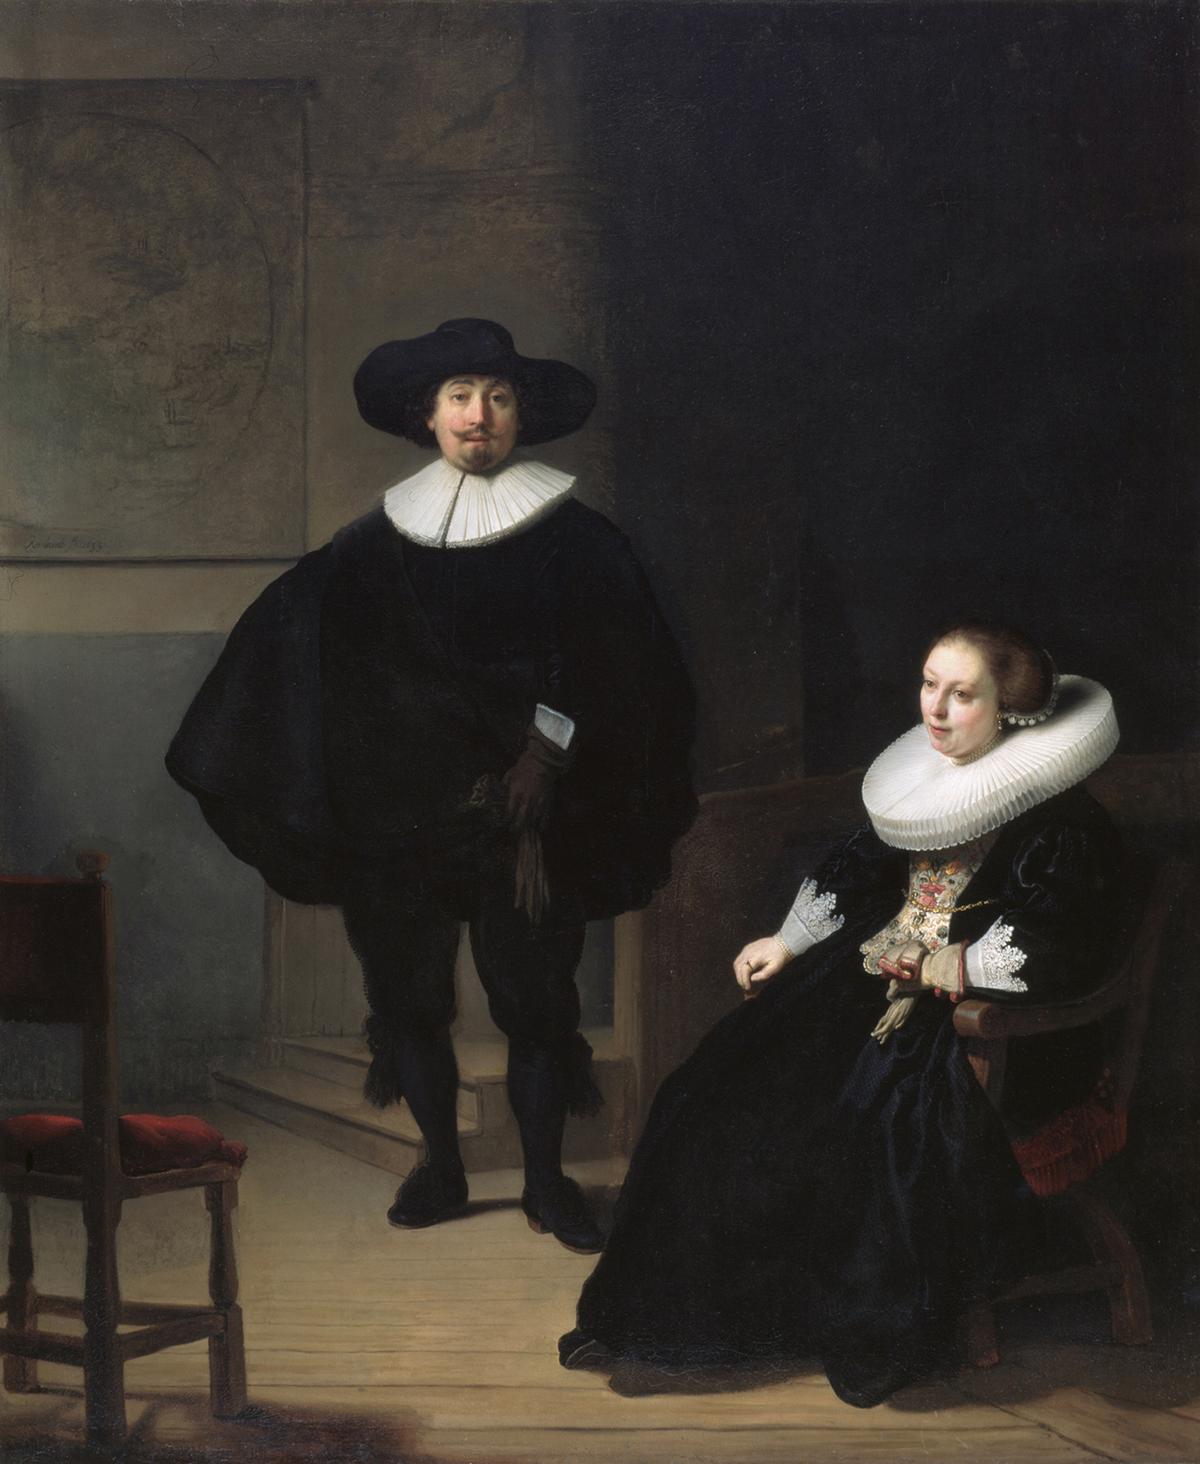 One of the stolen Rembrandt paintings from the Isabella Stewart Gardner Museum. "A Lady and Gentleman in Black," 1633, by Rembrandt. Oil on canvas; 51 13/16 inches by 42 15/16 inches. (Public Domain)